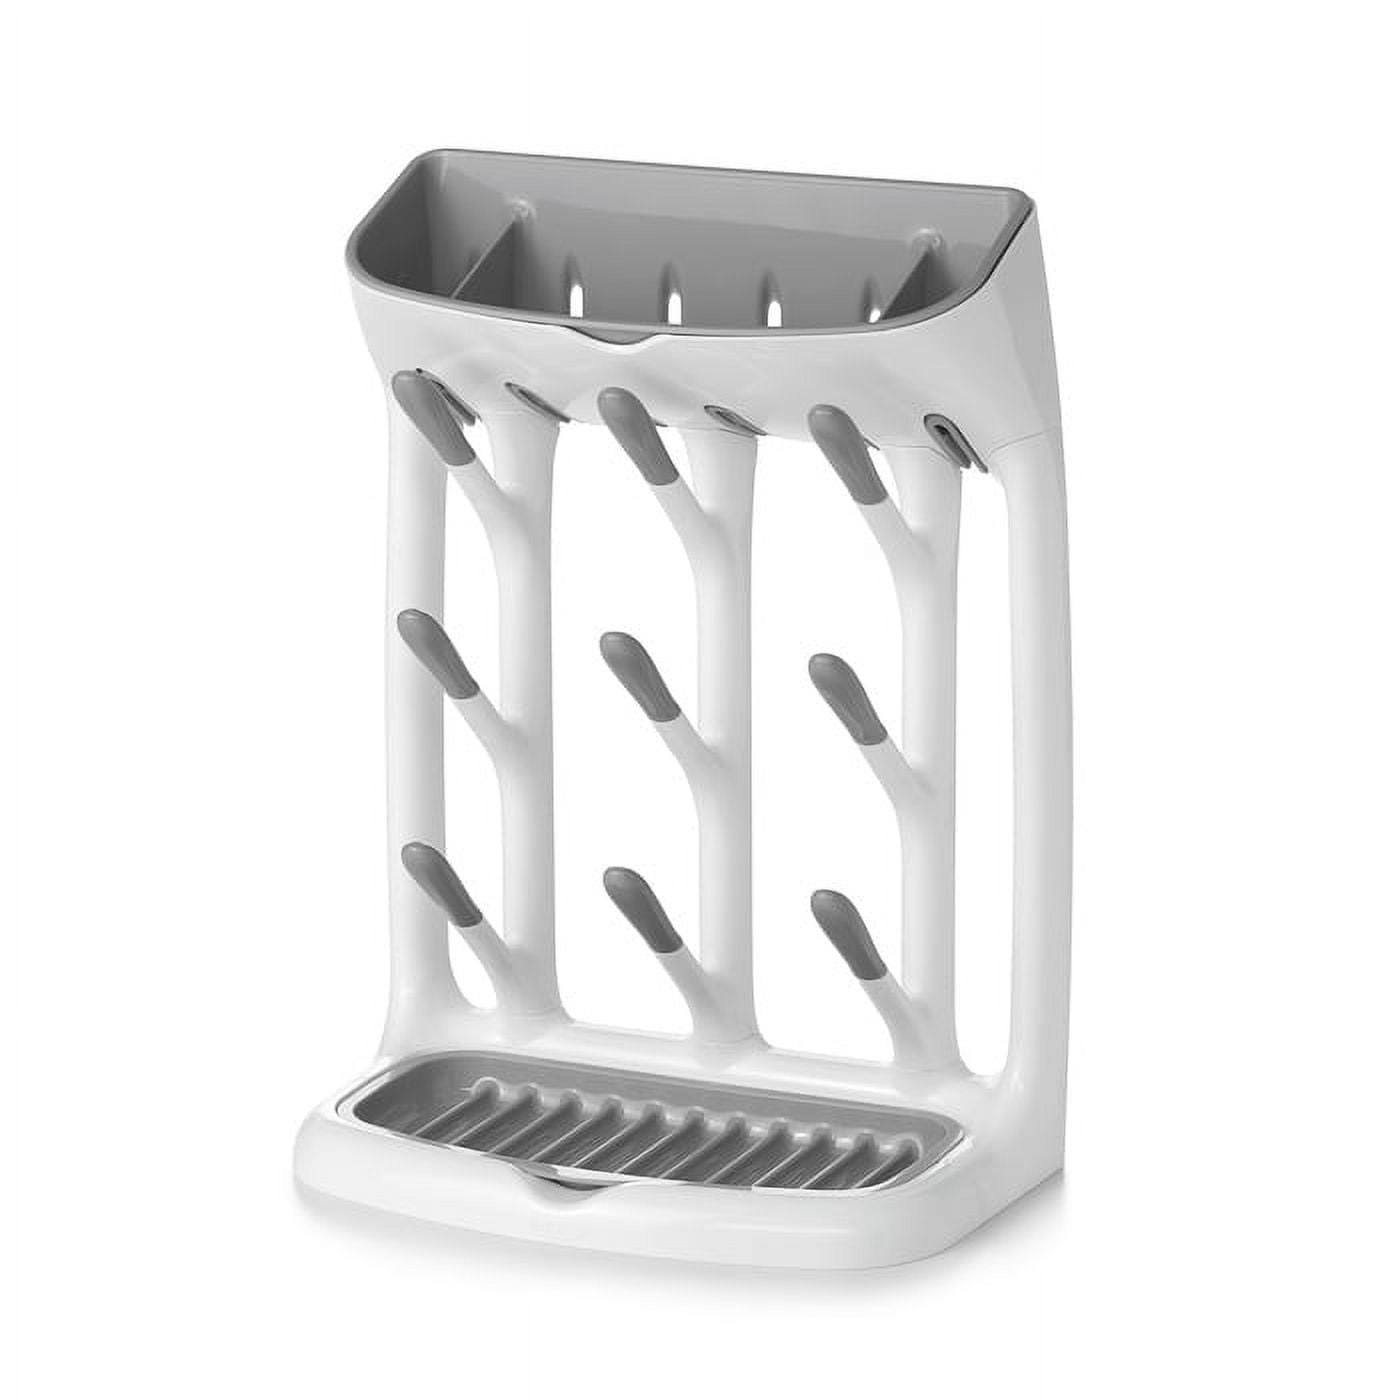 Shop OXO Tot Space Saving Drying Rack Online Melbourne at Kiddie Country™️